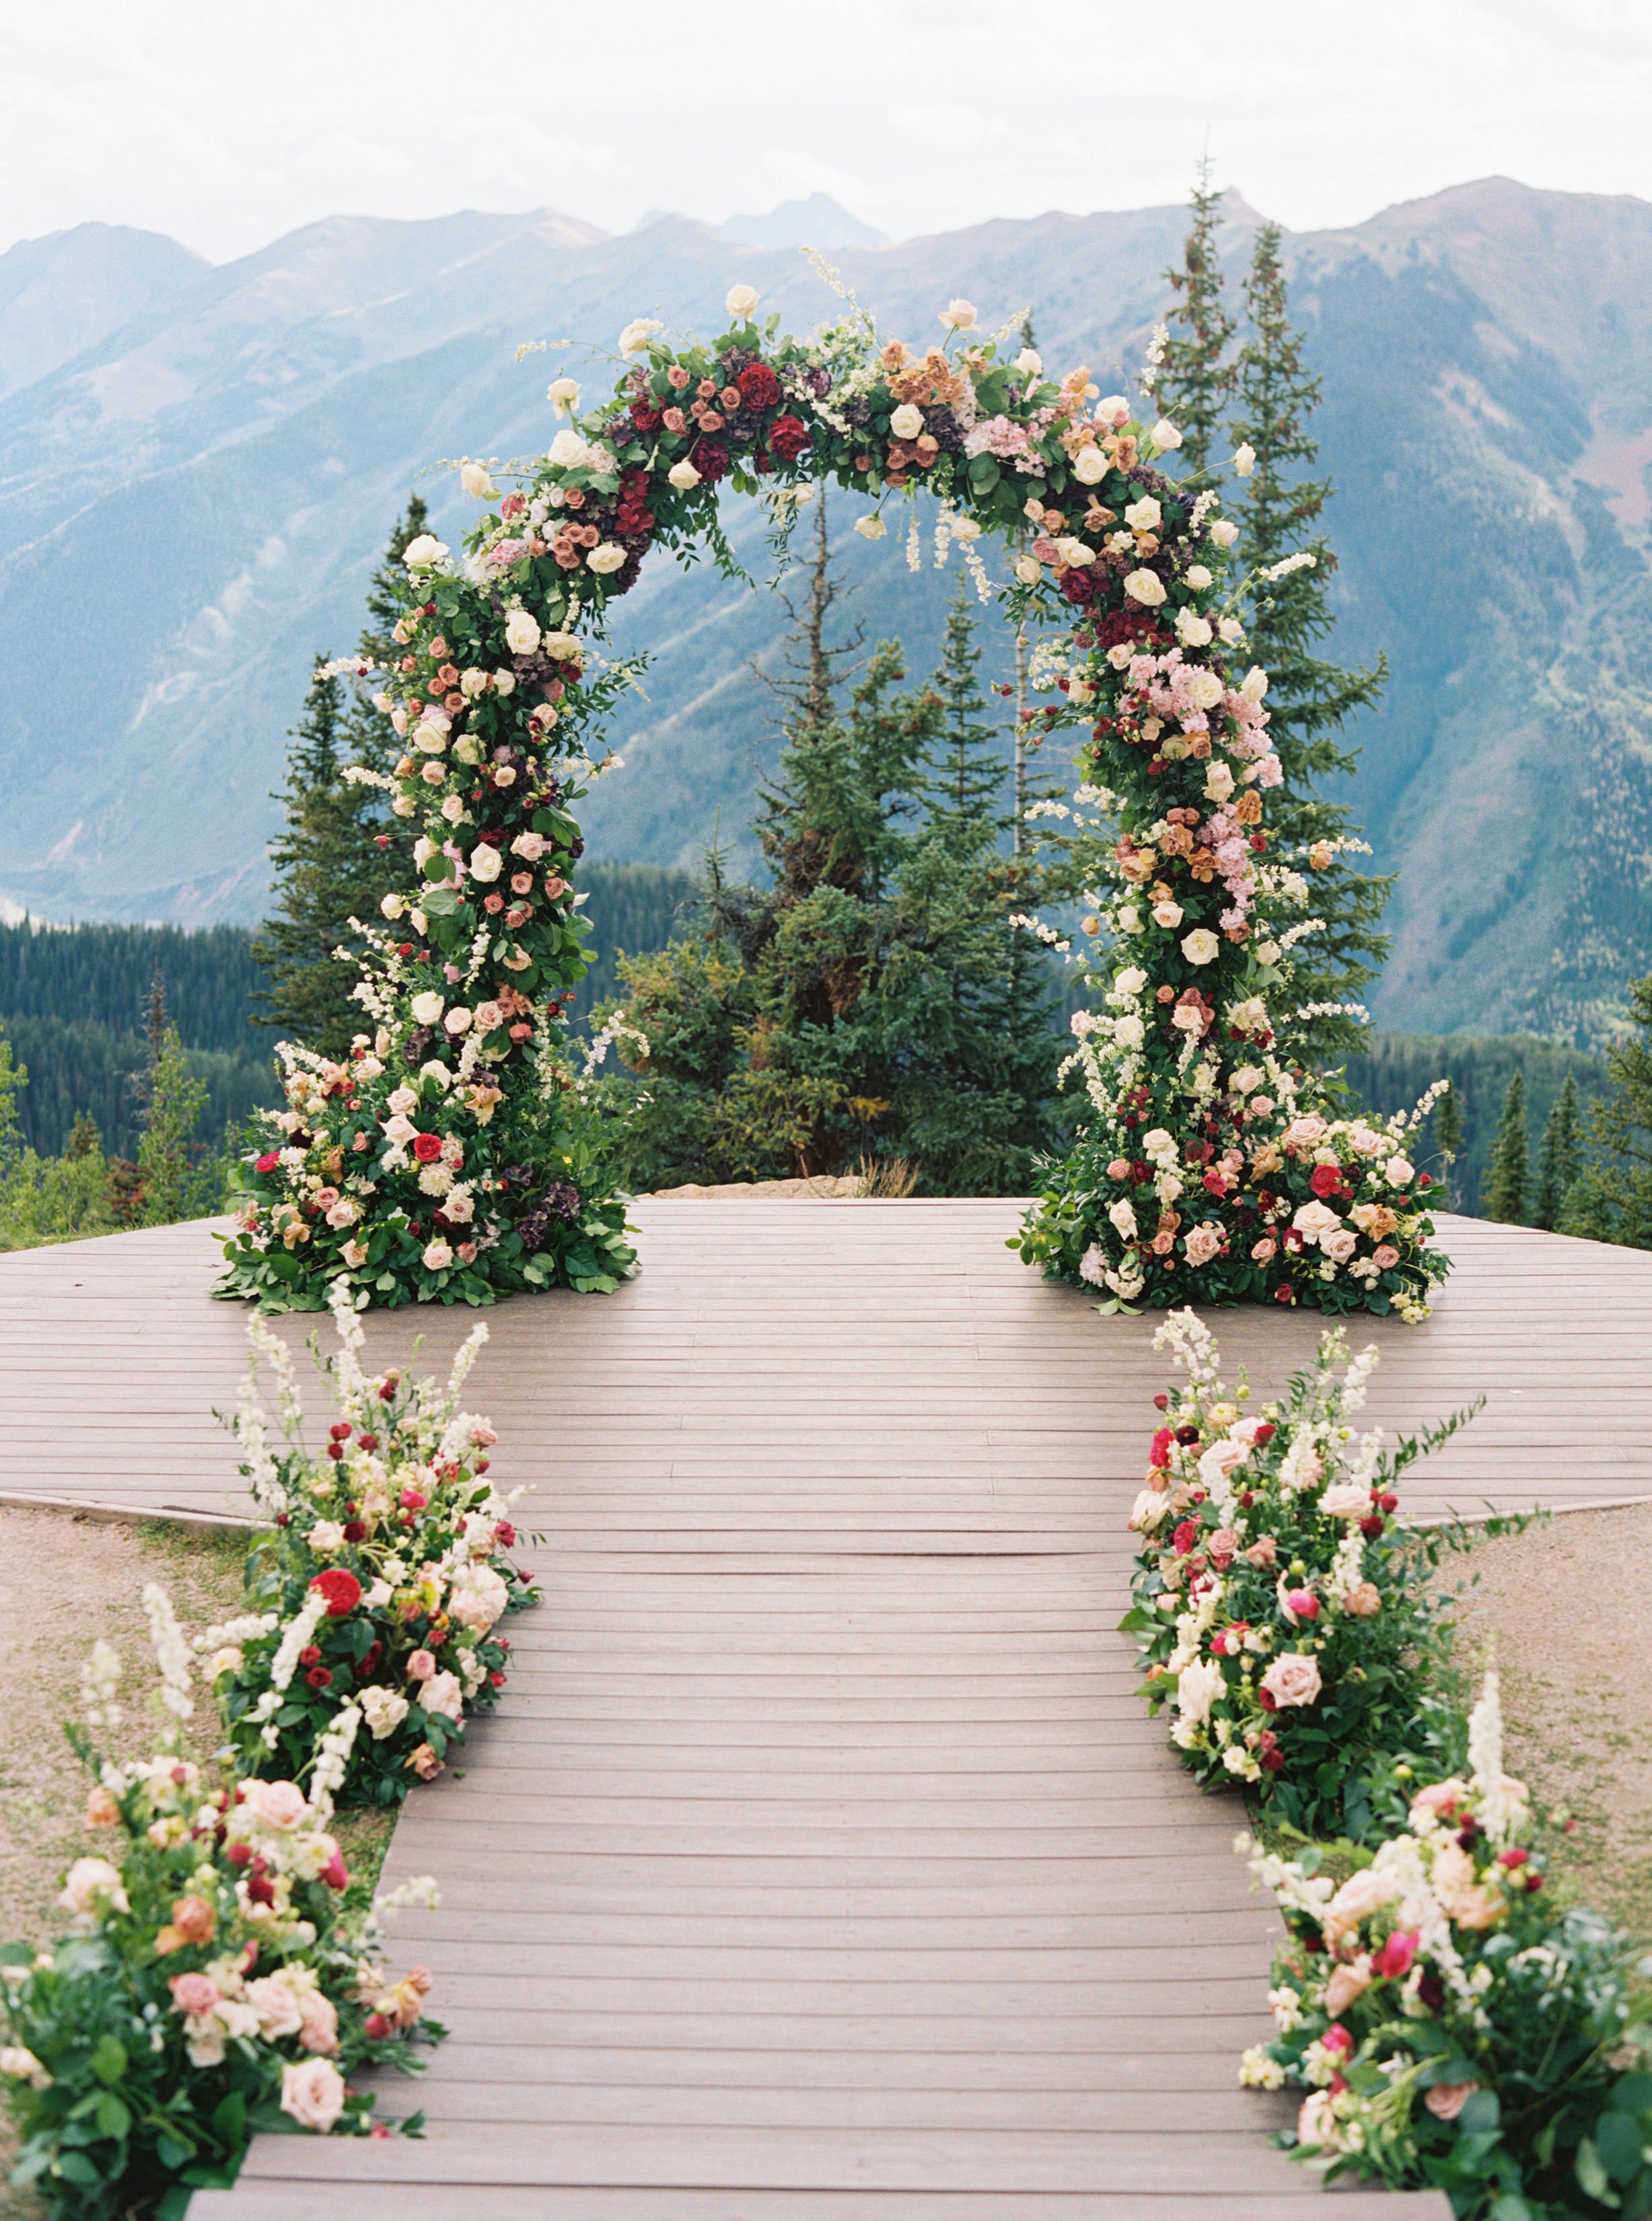 Pink-Champagne-Designs-Floral-Ceremony-Mountain-Design